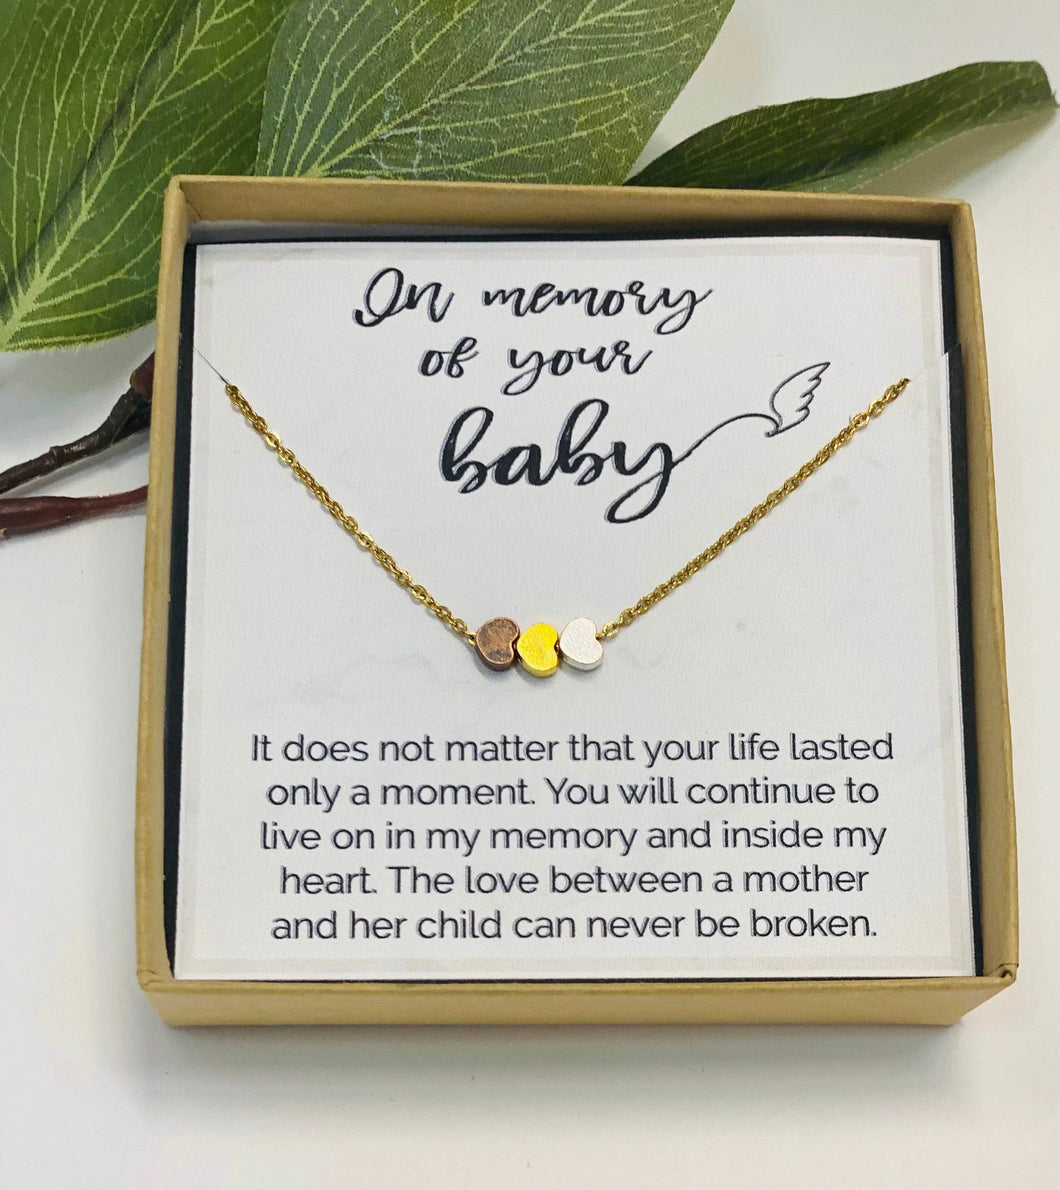 In Memory of Your Baby Necklace